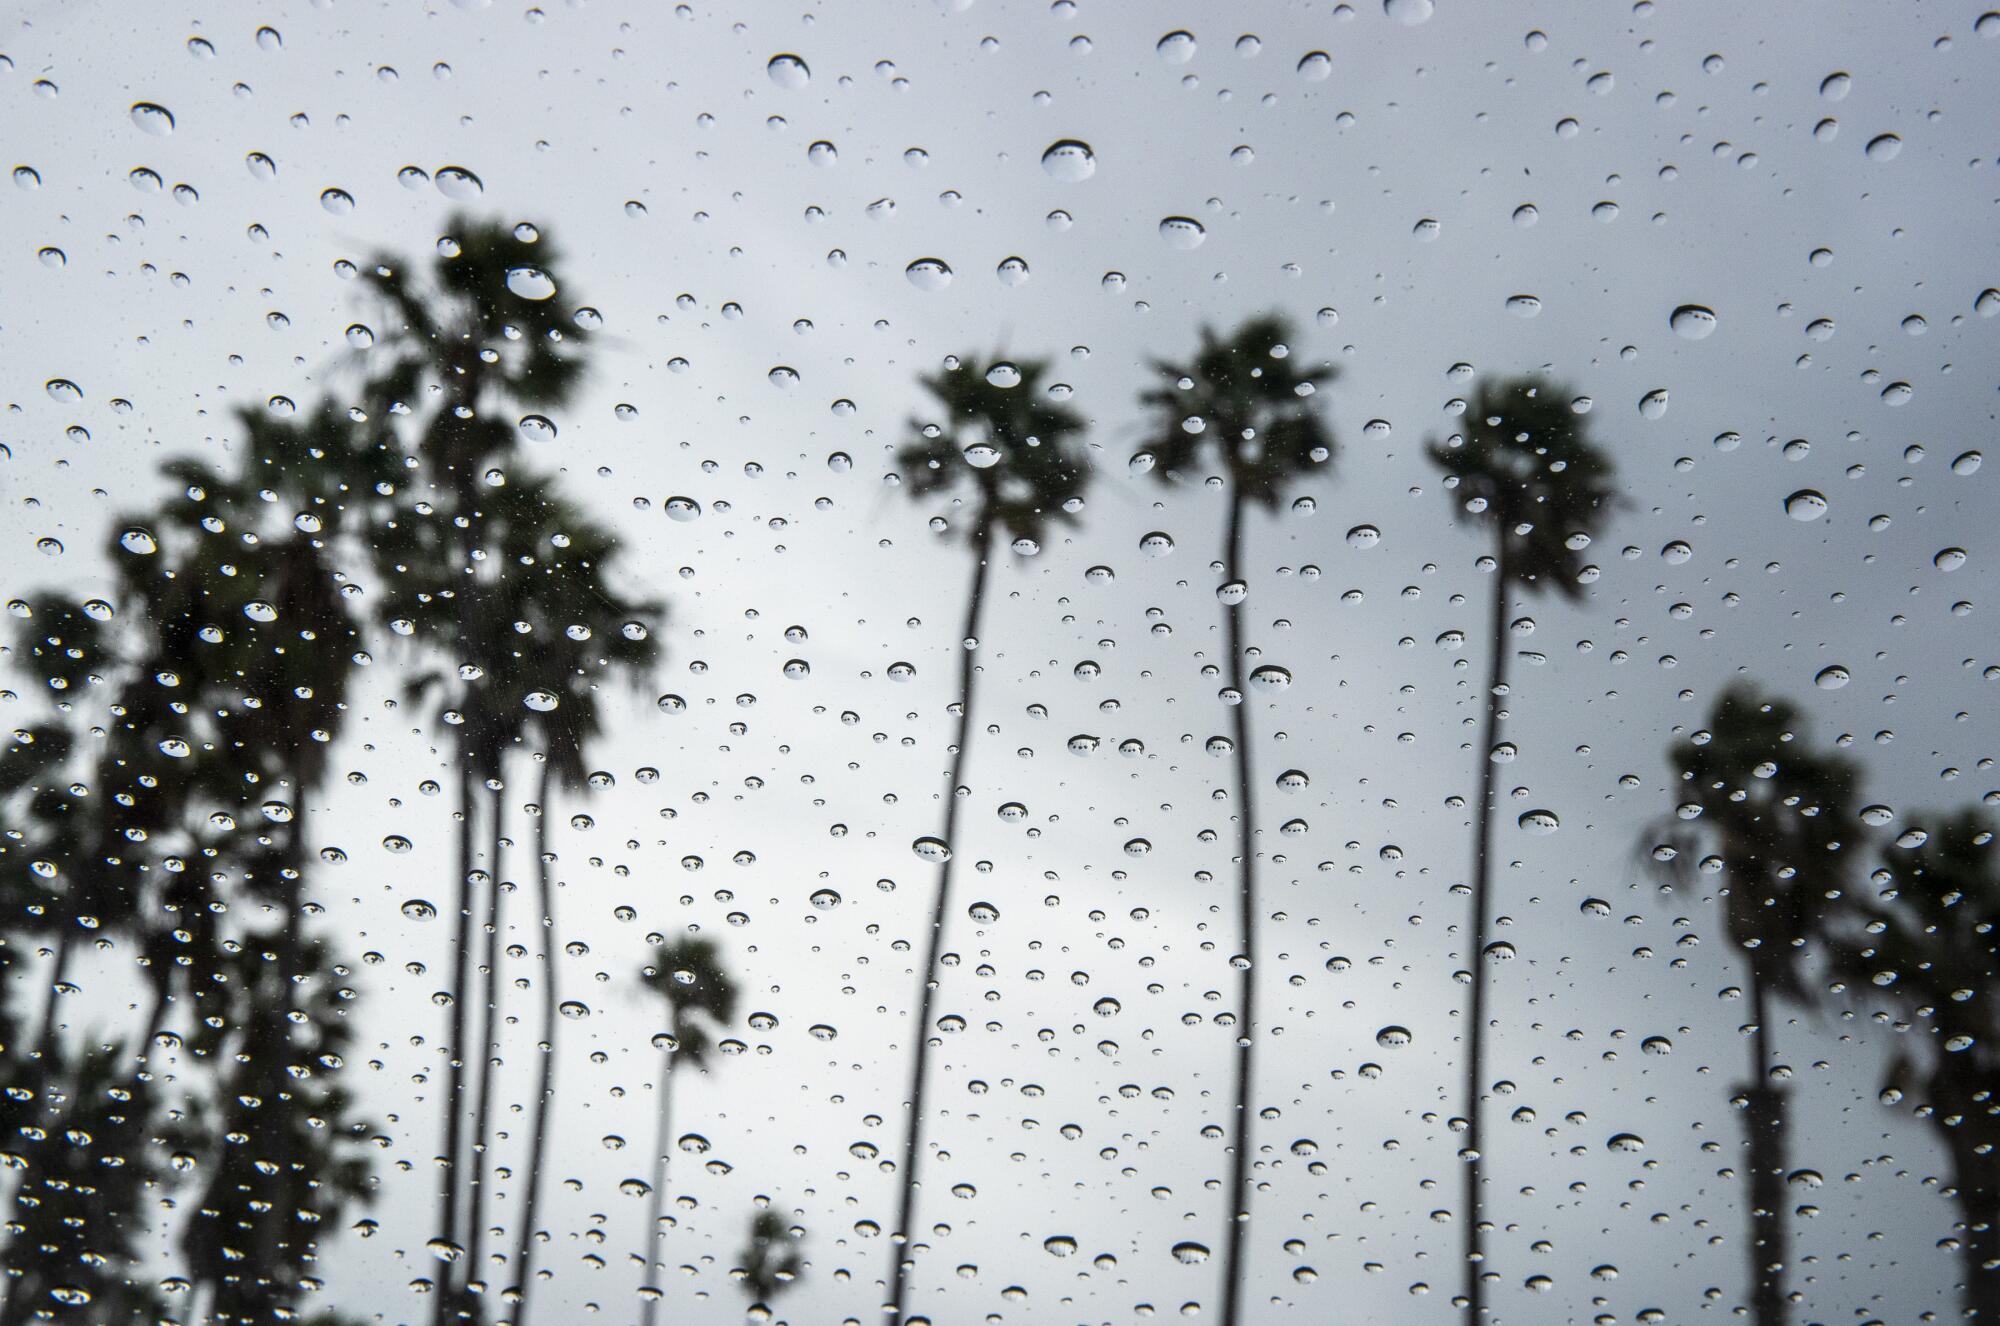 Raindrops cover a reflection of palm trees on a glass surface.